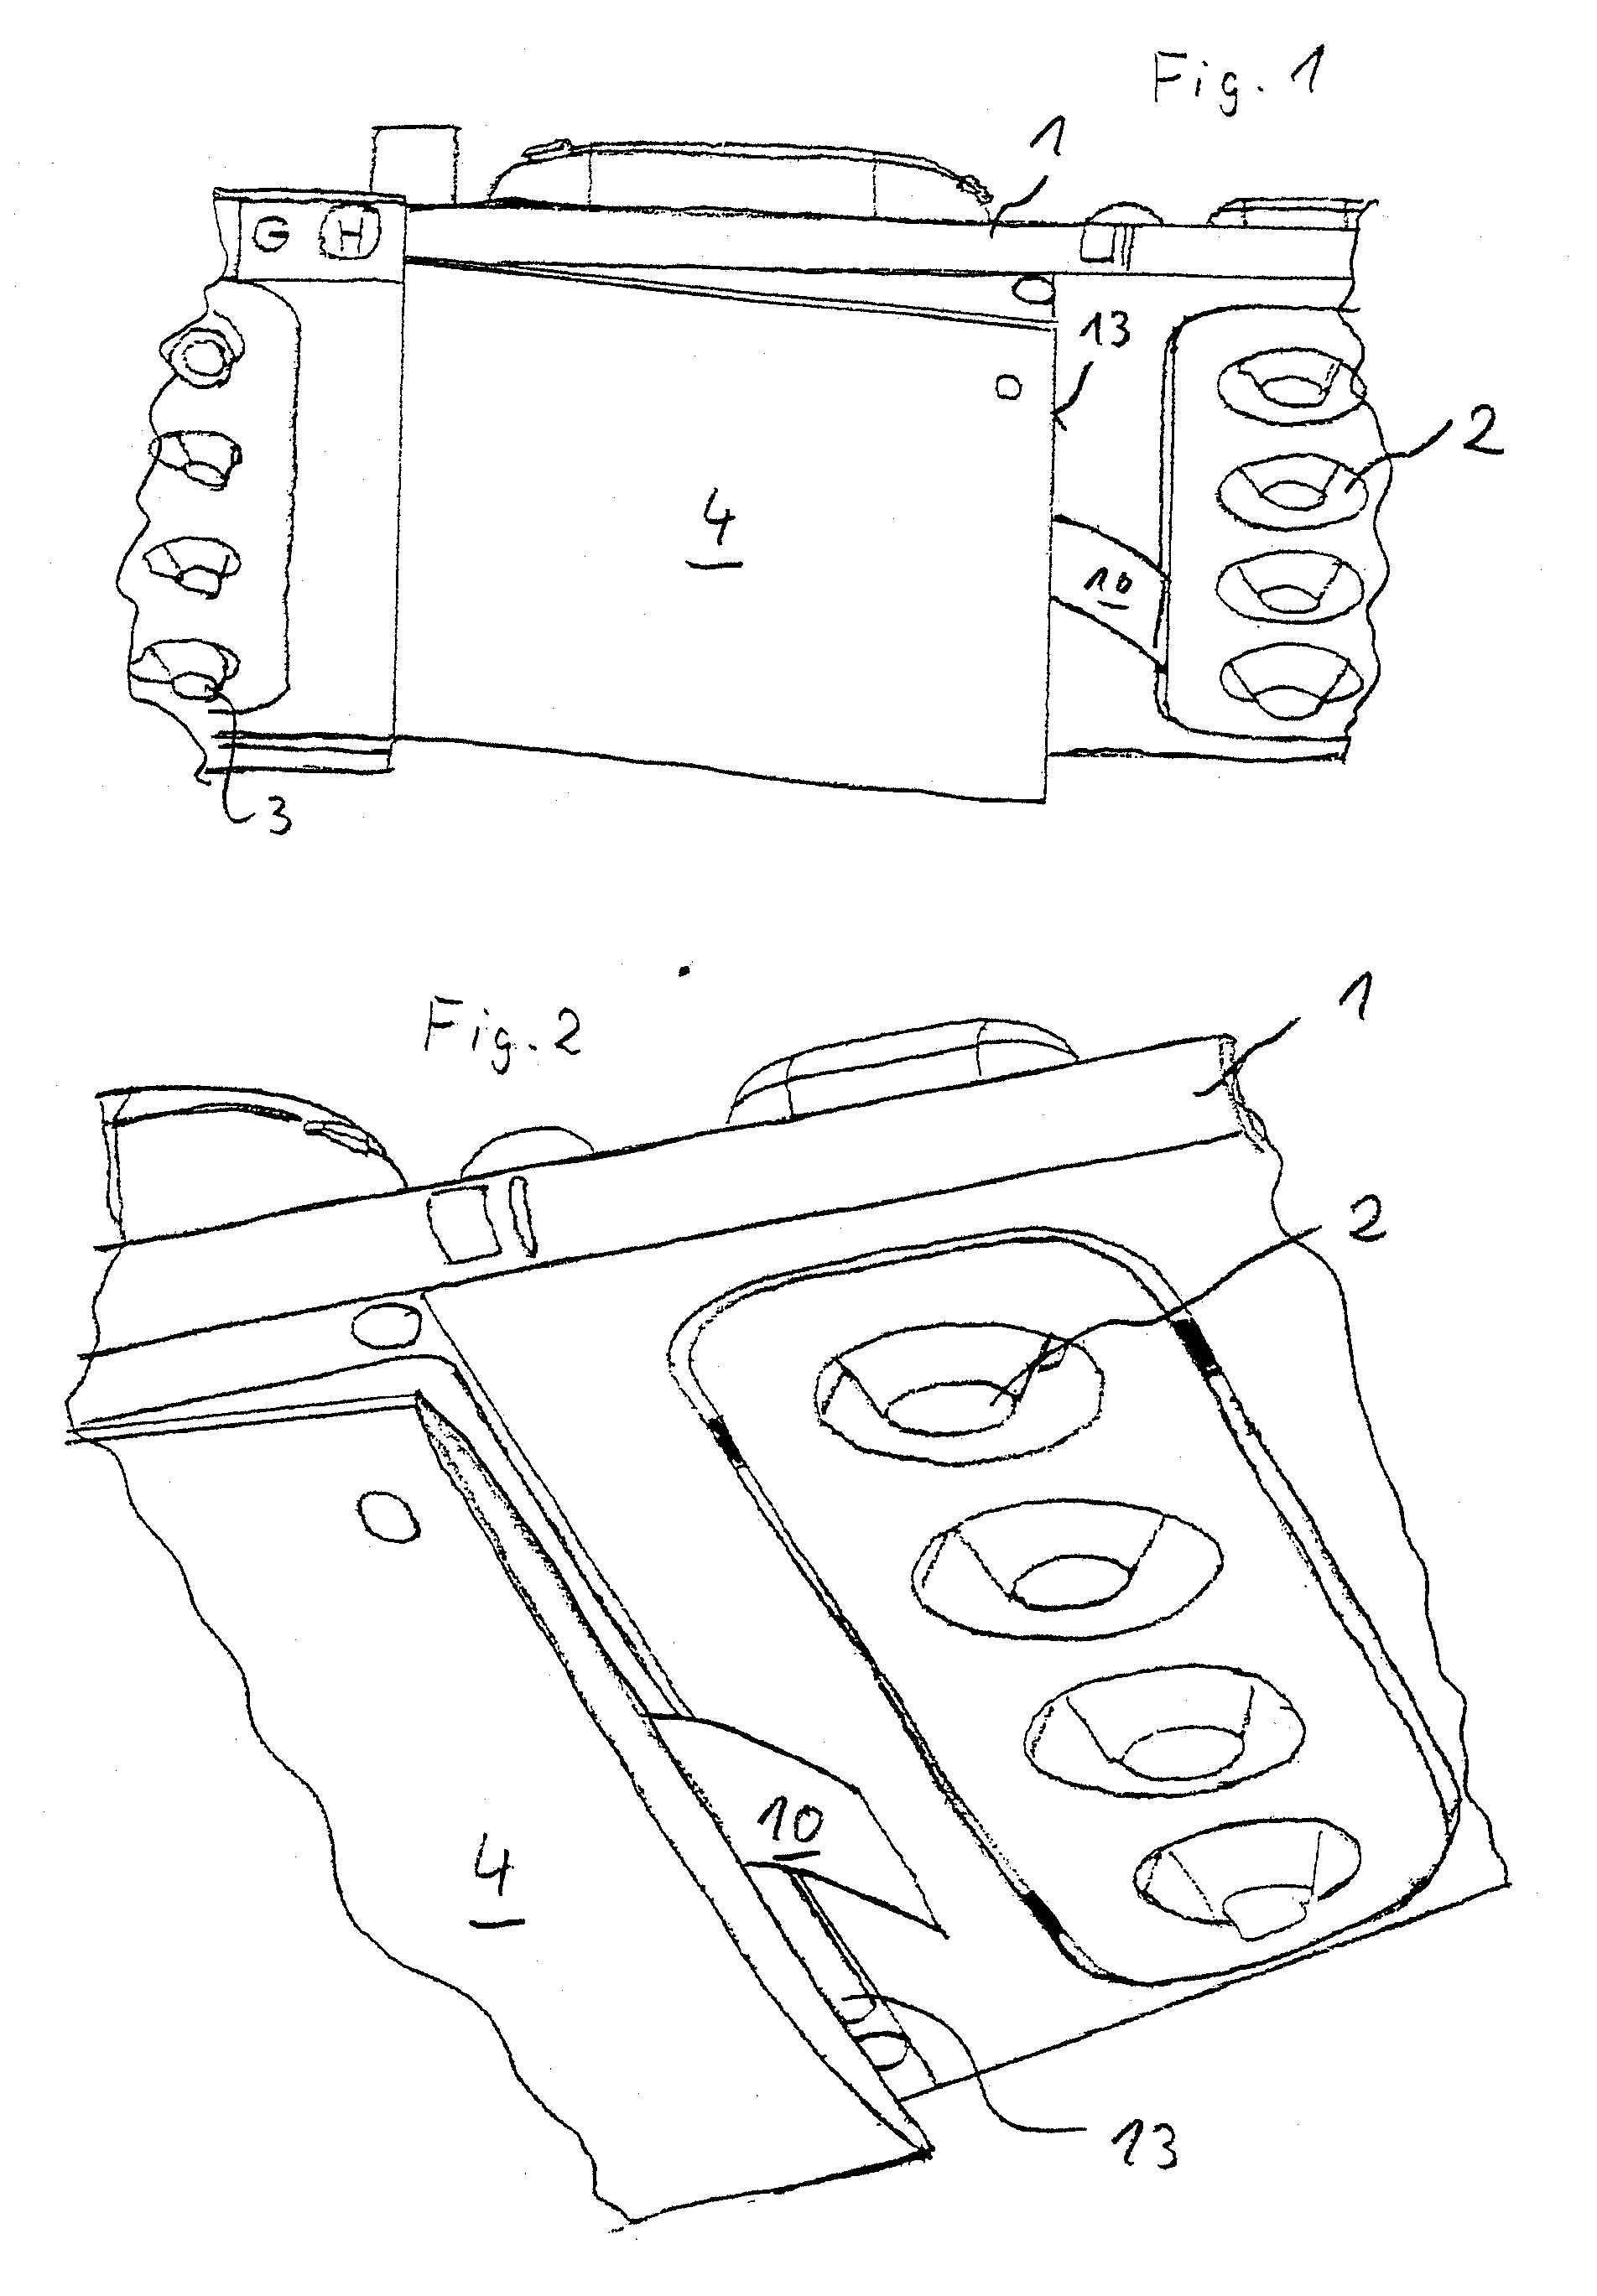 Method for equipping a personal service unit with passenger oxygen masks